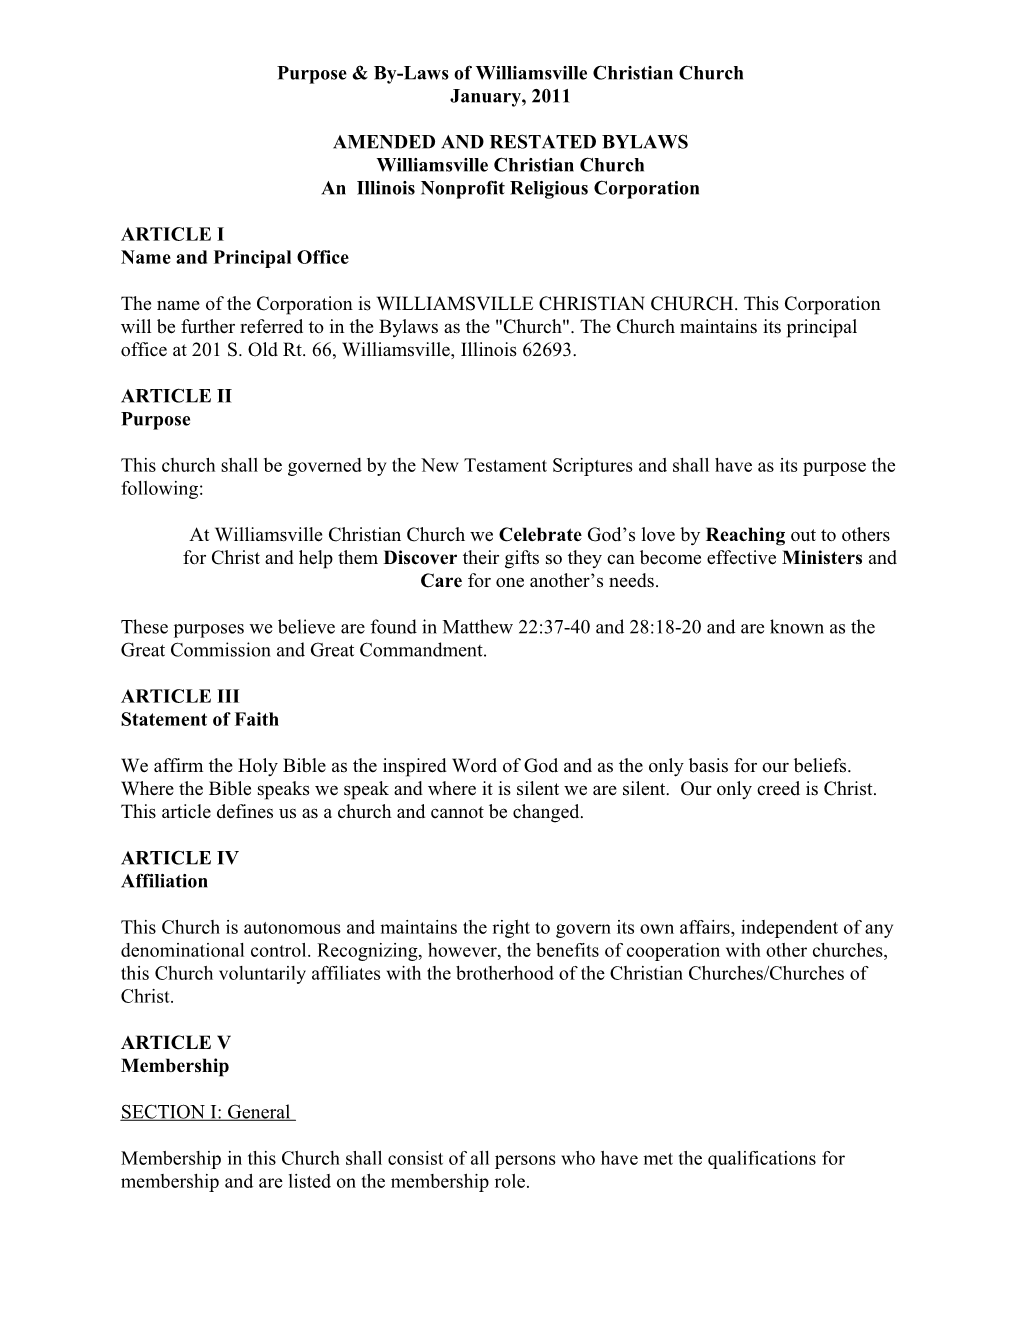 Williamsvile Christian Church Bylaws January, 2005 AMENDED and RESTATED by the Elders Of